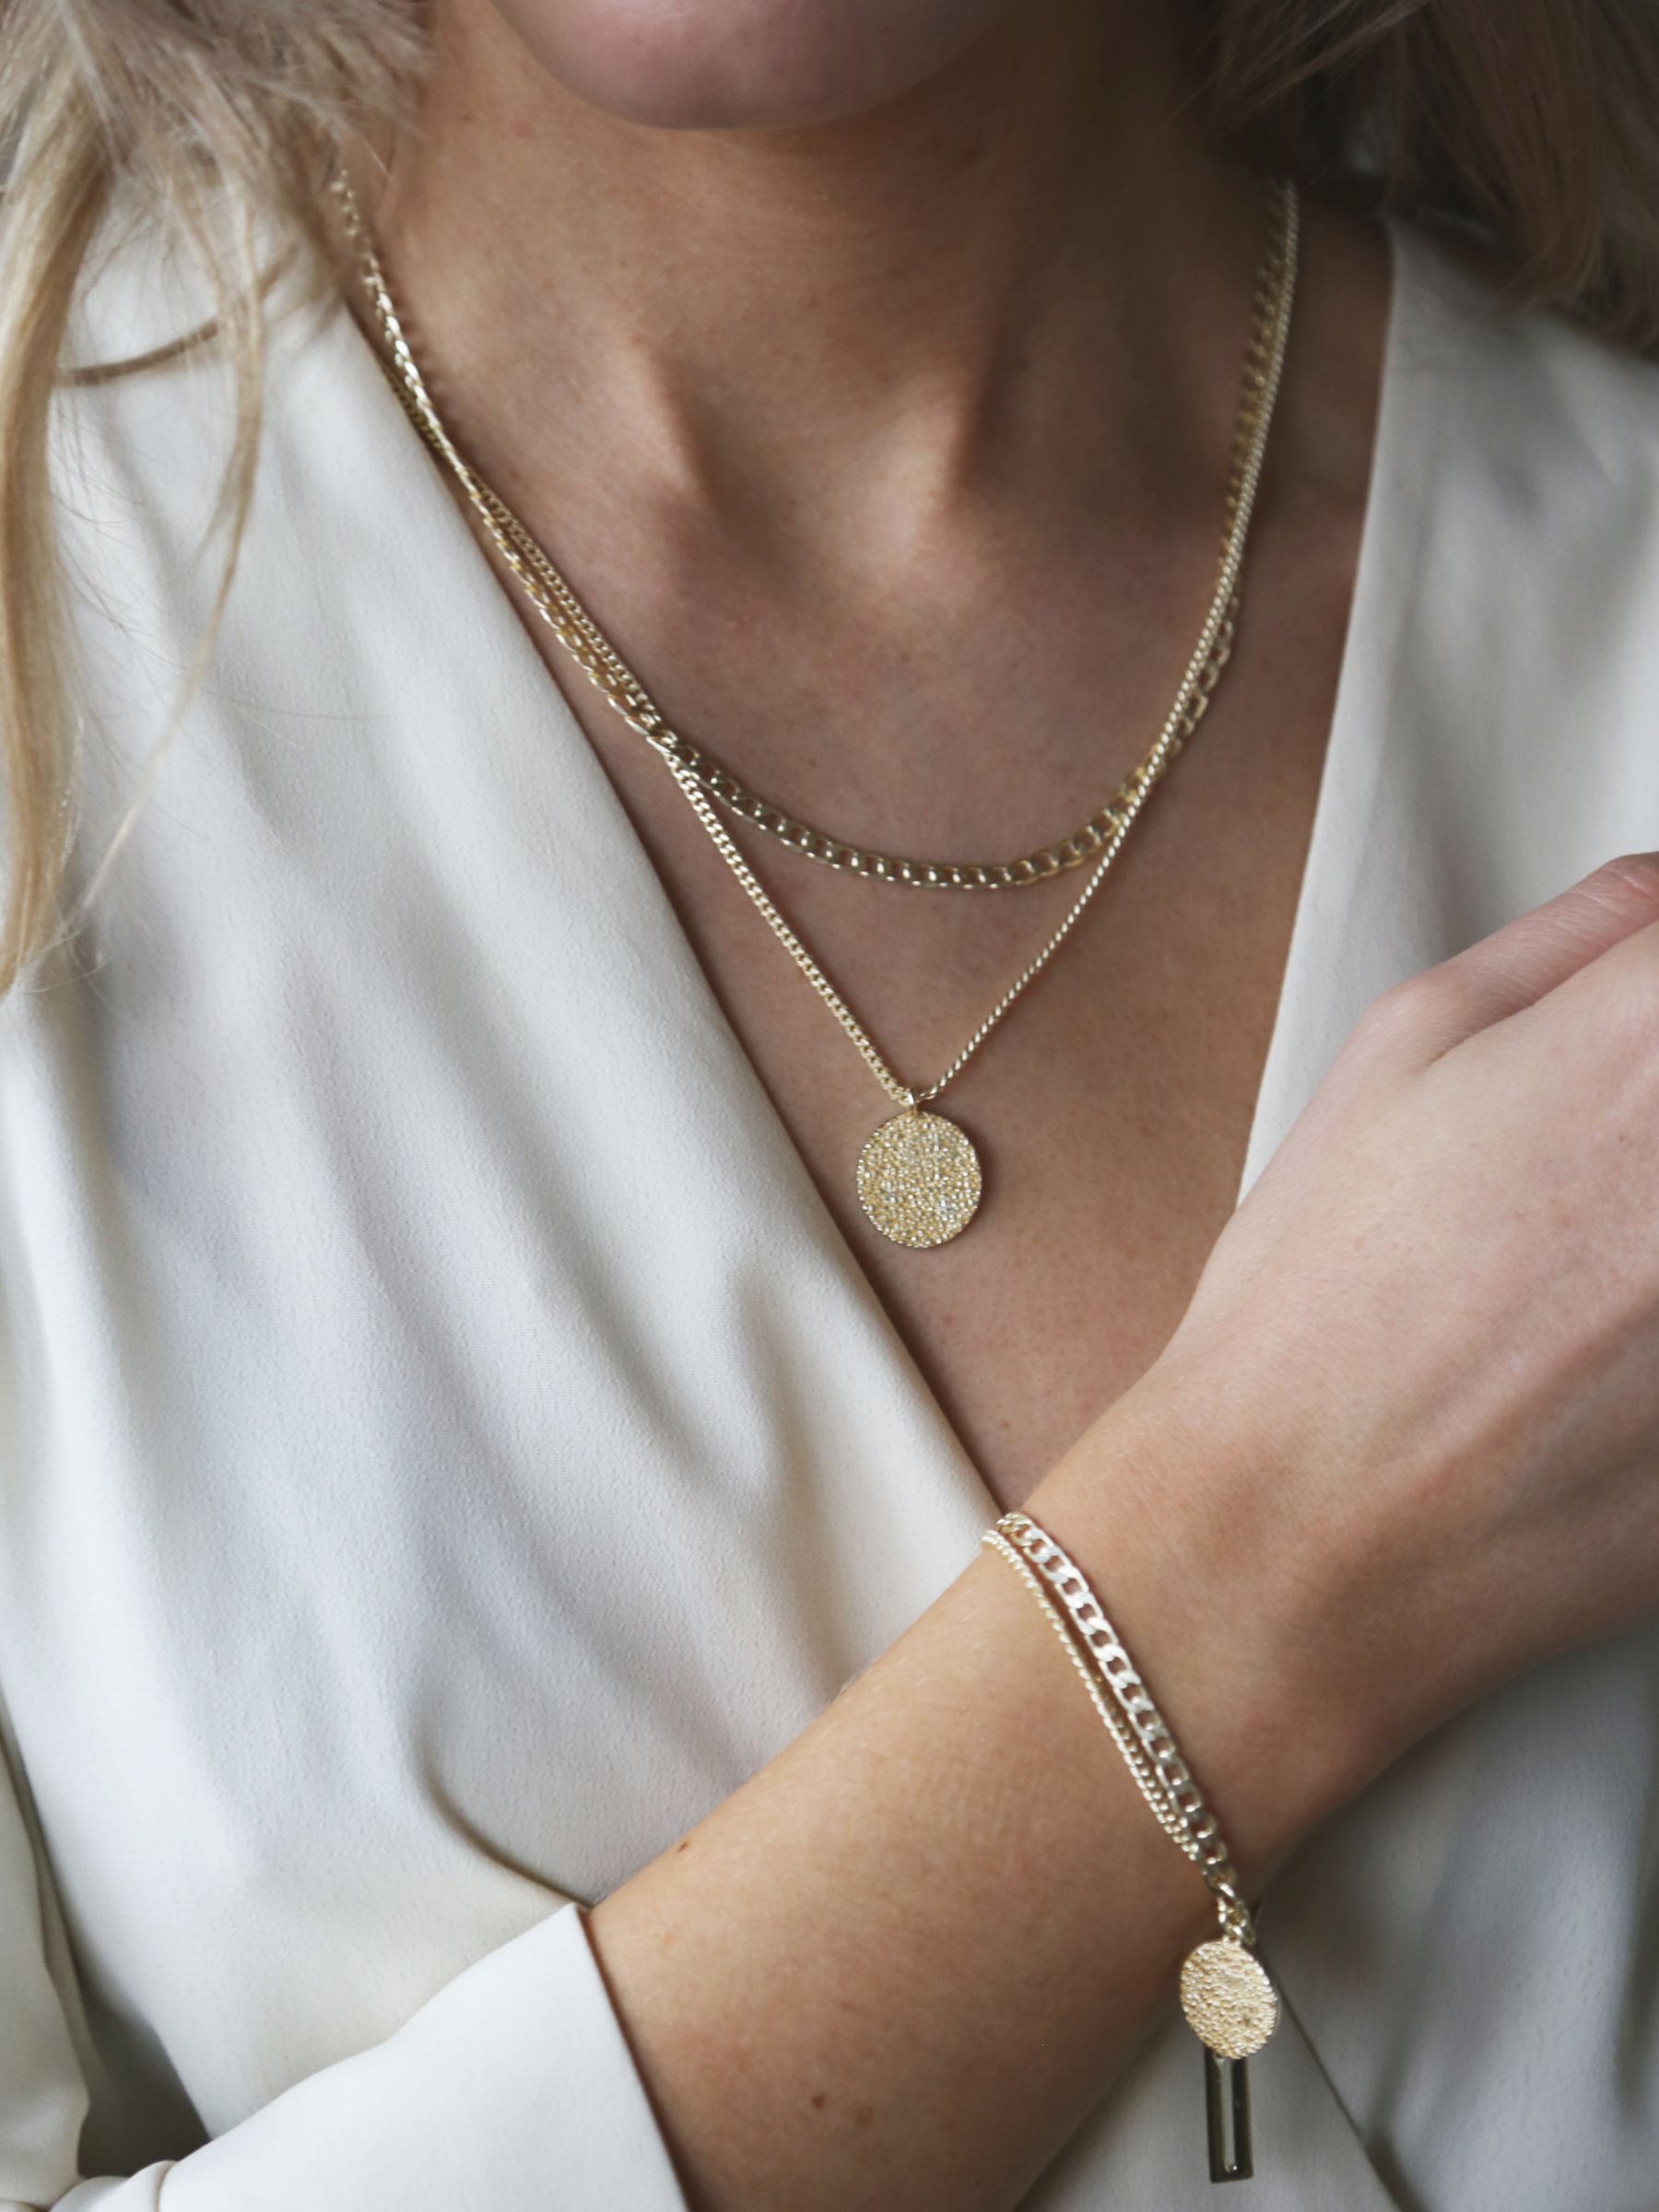 Buy Tutti & Co Textured Disc Double Chain Layered Necklace, Gold Online at johnlewis.com